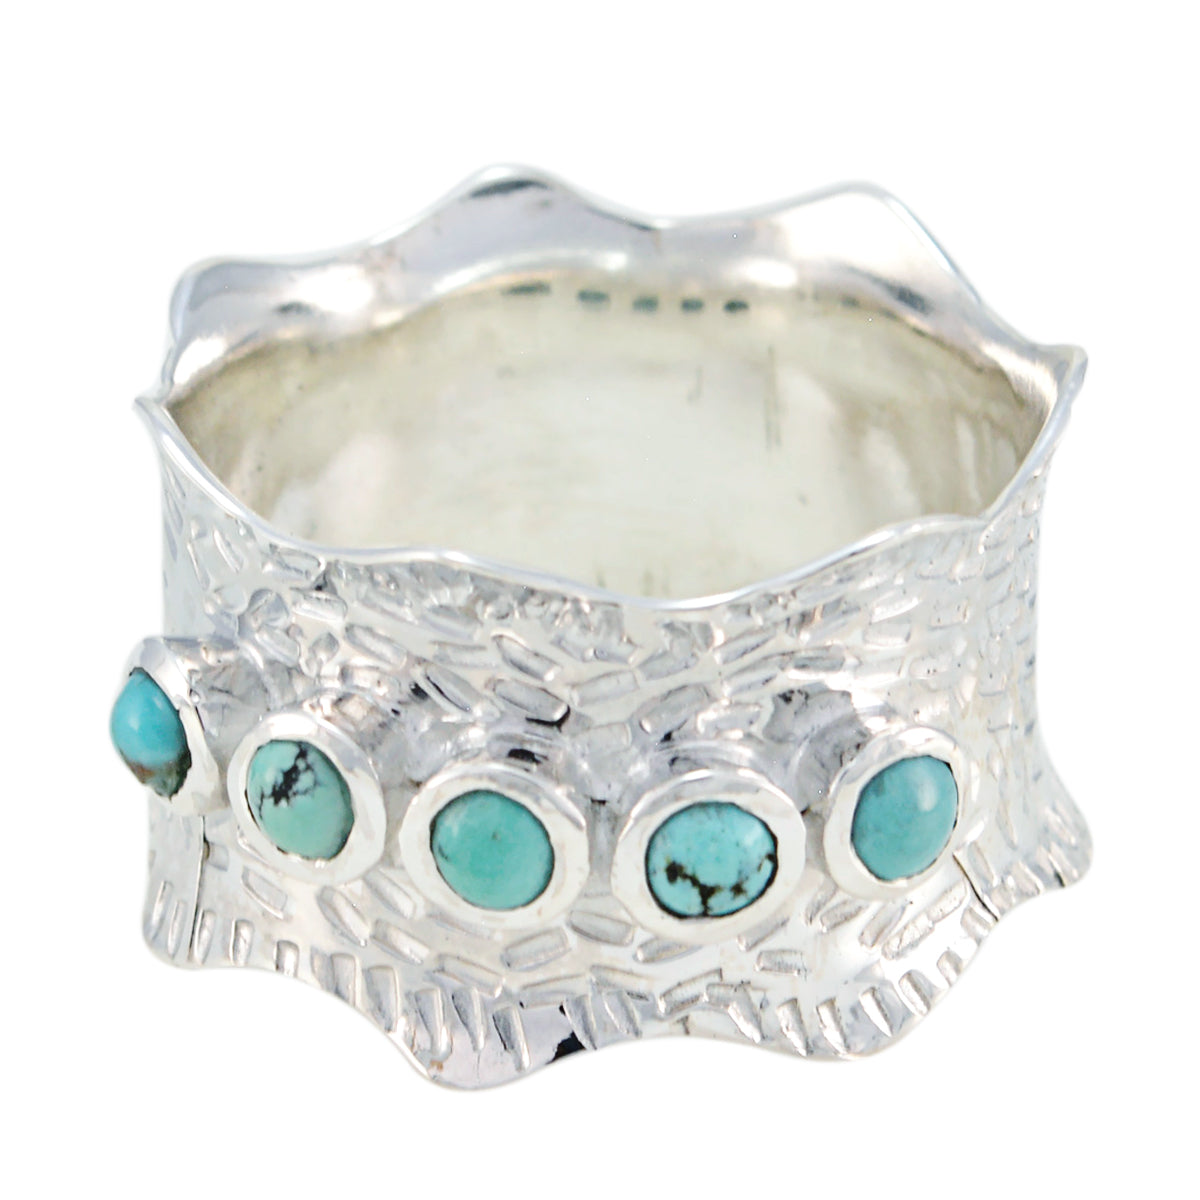 Enticing Gem Turquoise 925 Silver Ring Premier Designs Jewelry Catalog